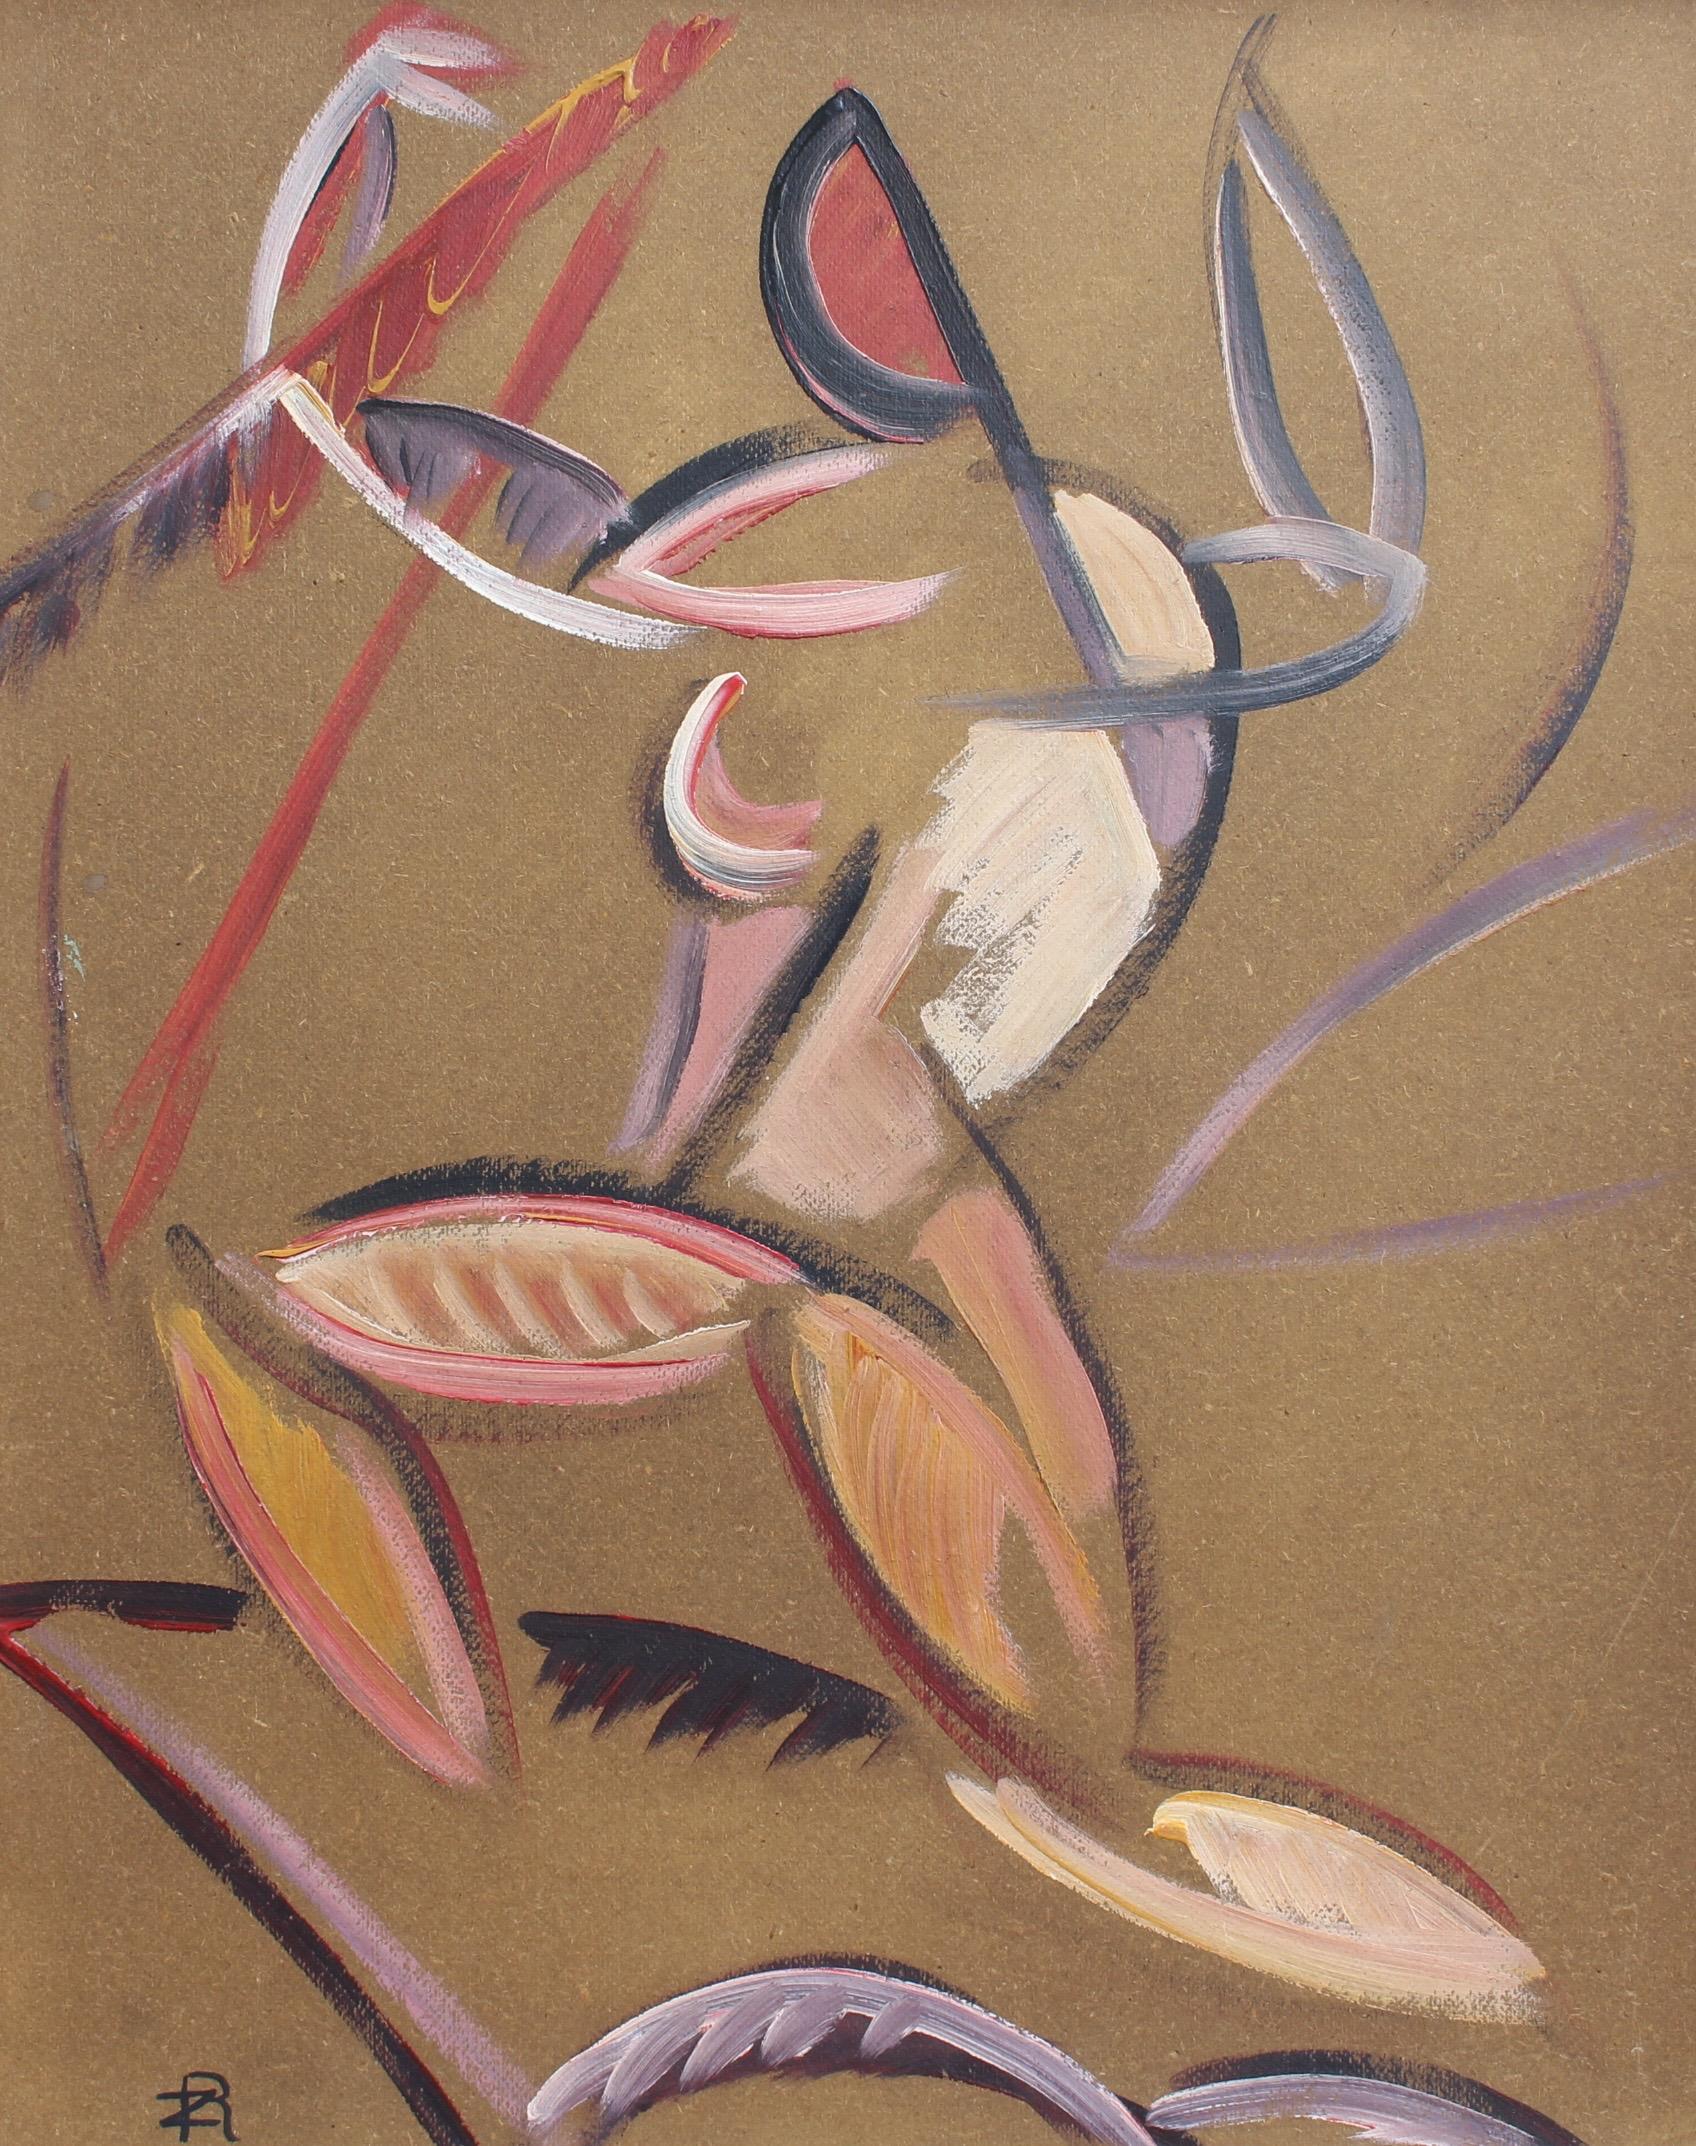 Unknown Abstract Painting - 'Composition with Triumphant Figure', Mid-Century Modern Abstract Art, Berlin